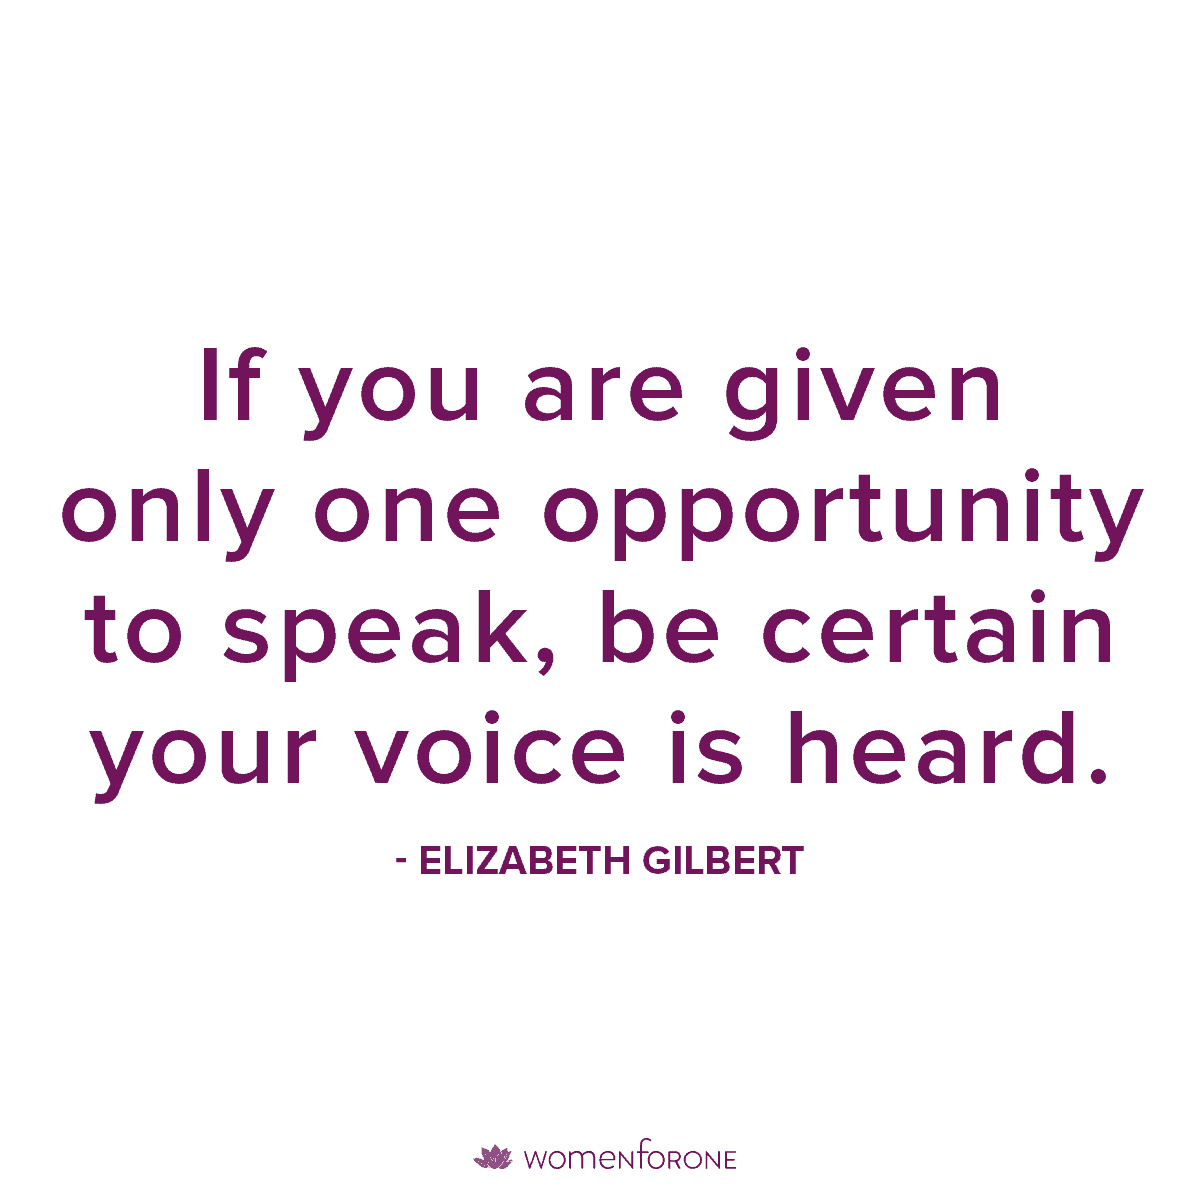 If you are given only one opportunity to speak, be certain your voice is heard. - Elizabeth Gilbert